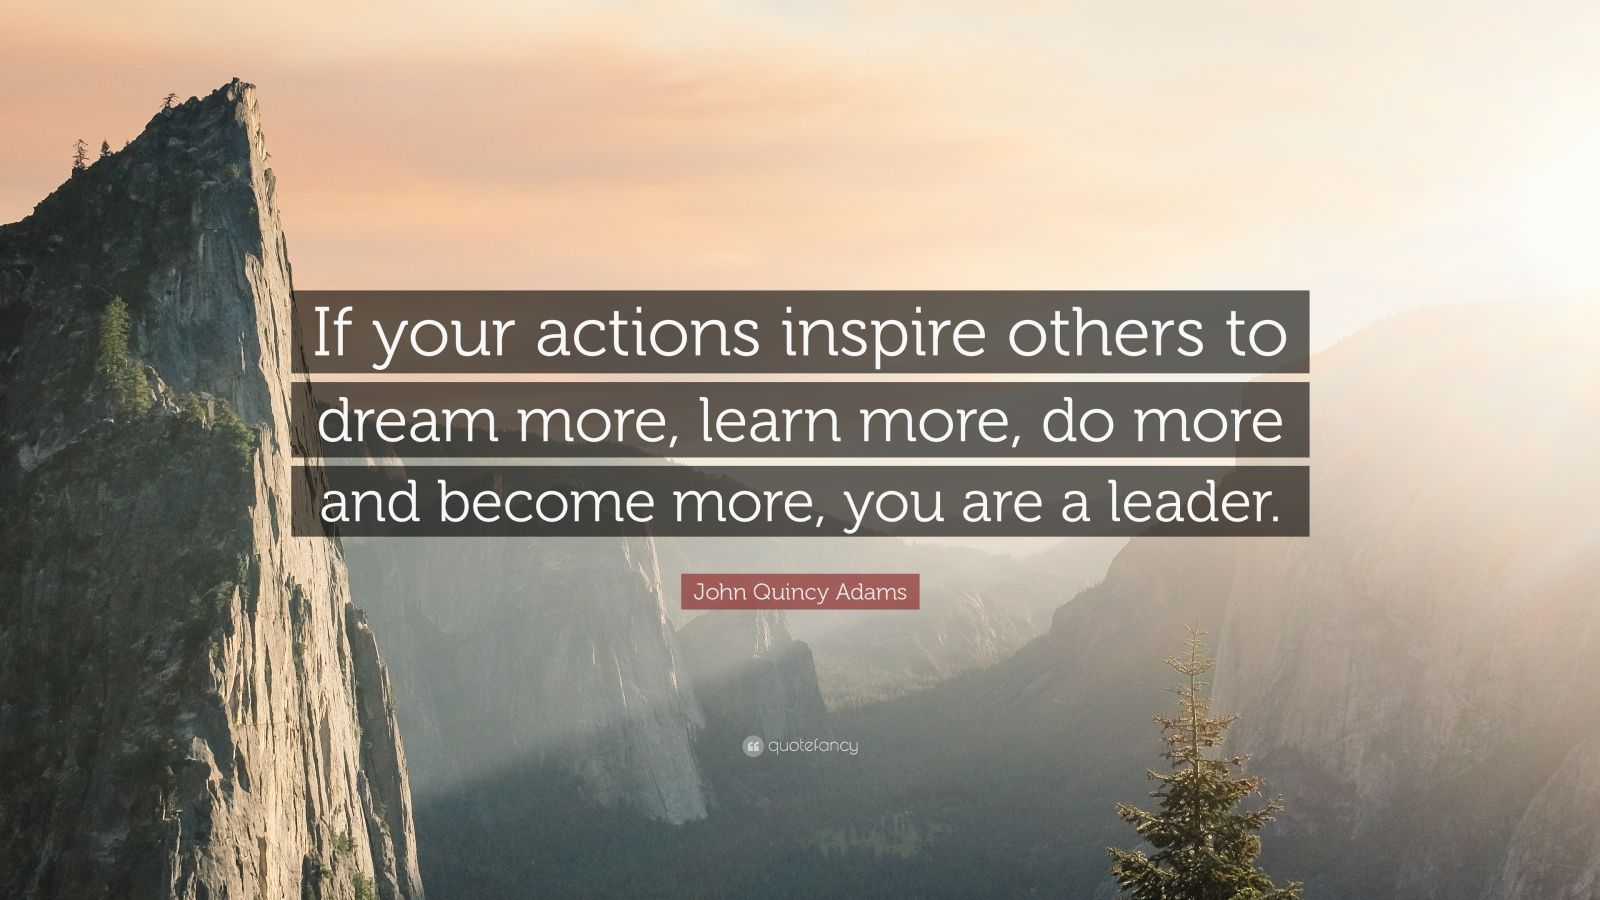 John Quincy Adams Quote “If your actions inspire others